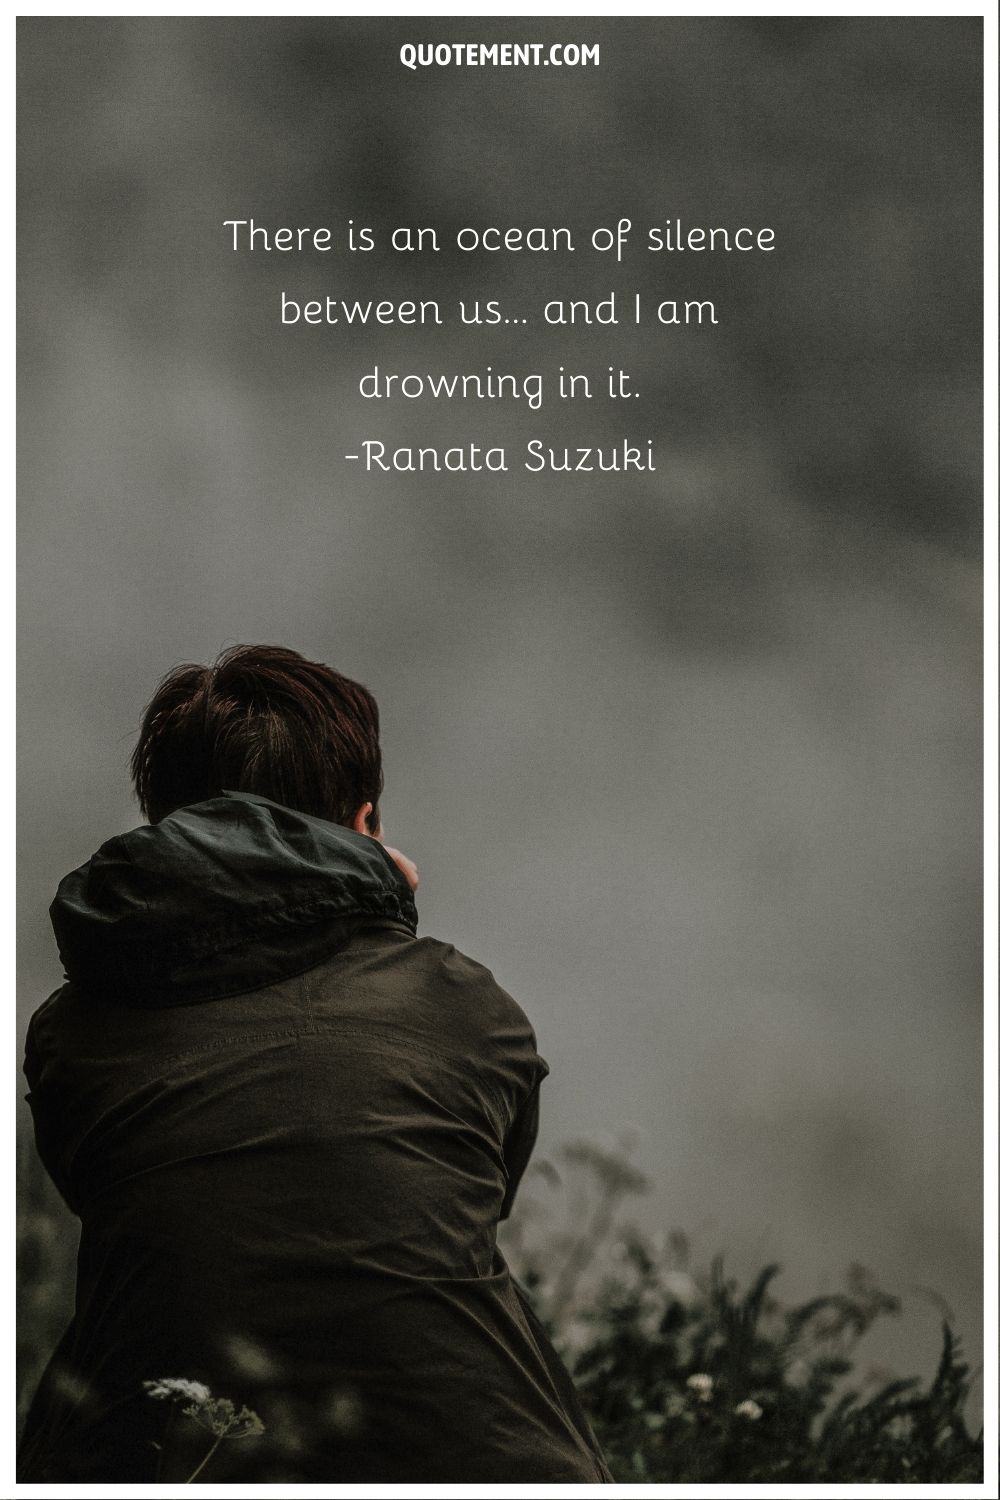 “There is an ocean of silence between us… and I am drowning in it.” ― Ranata Suzuki